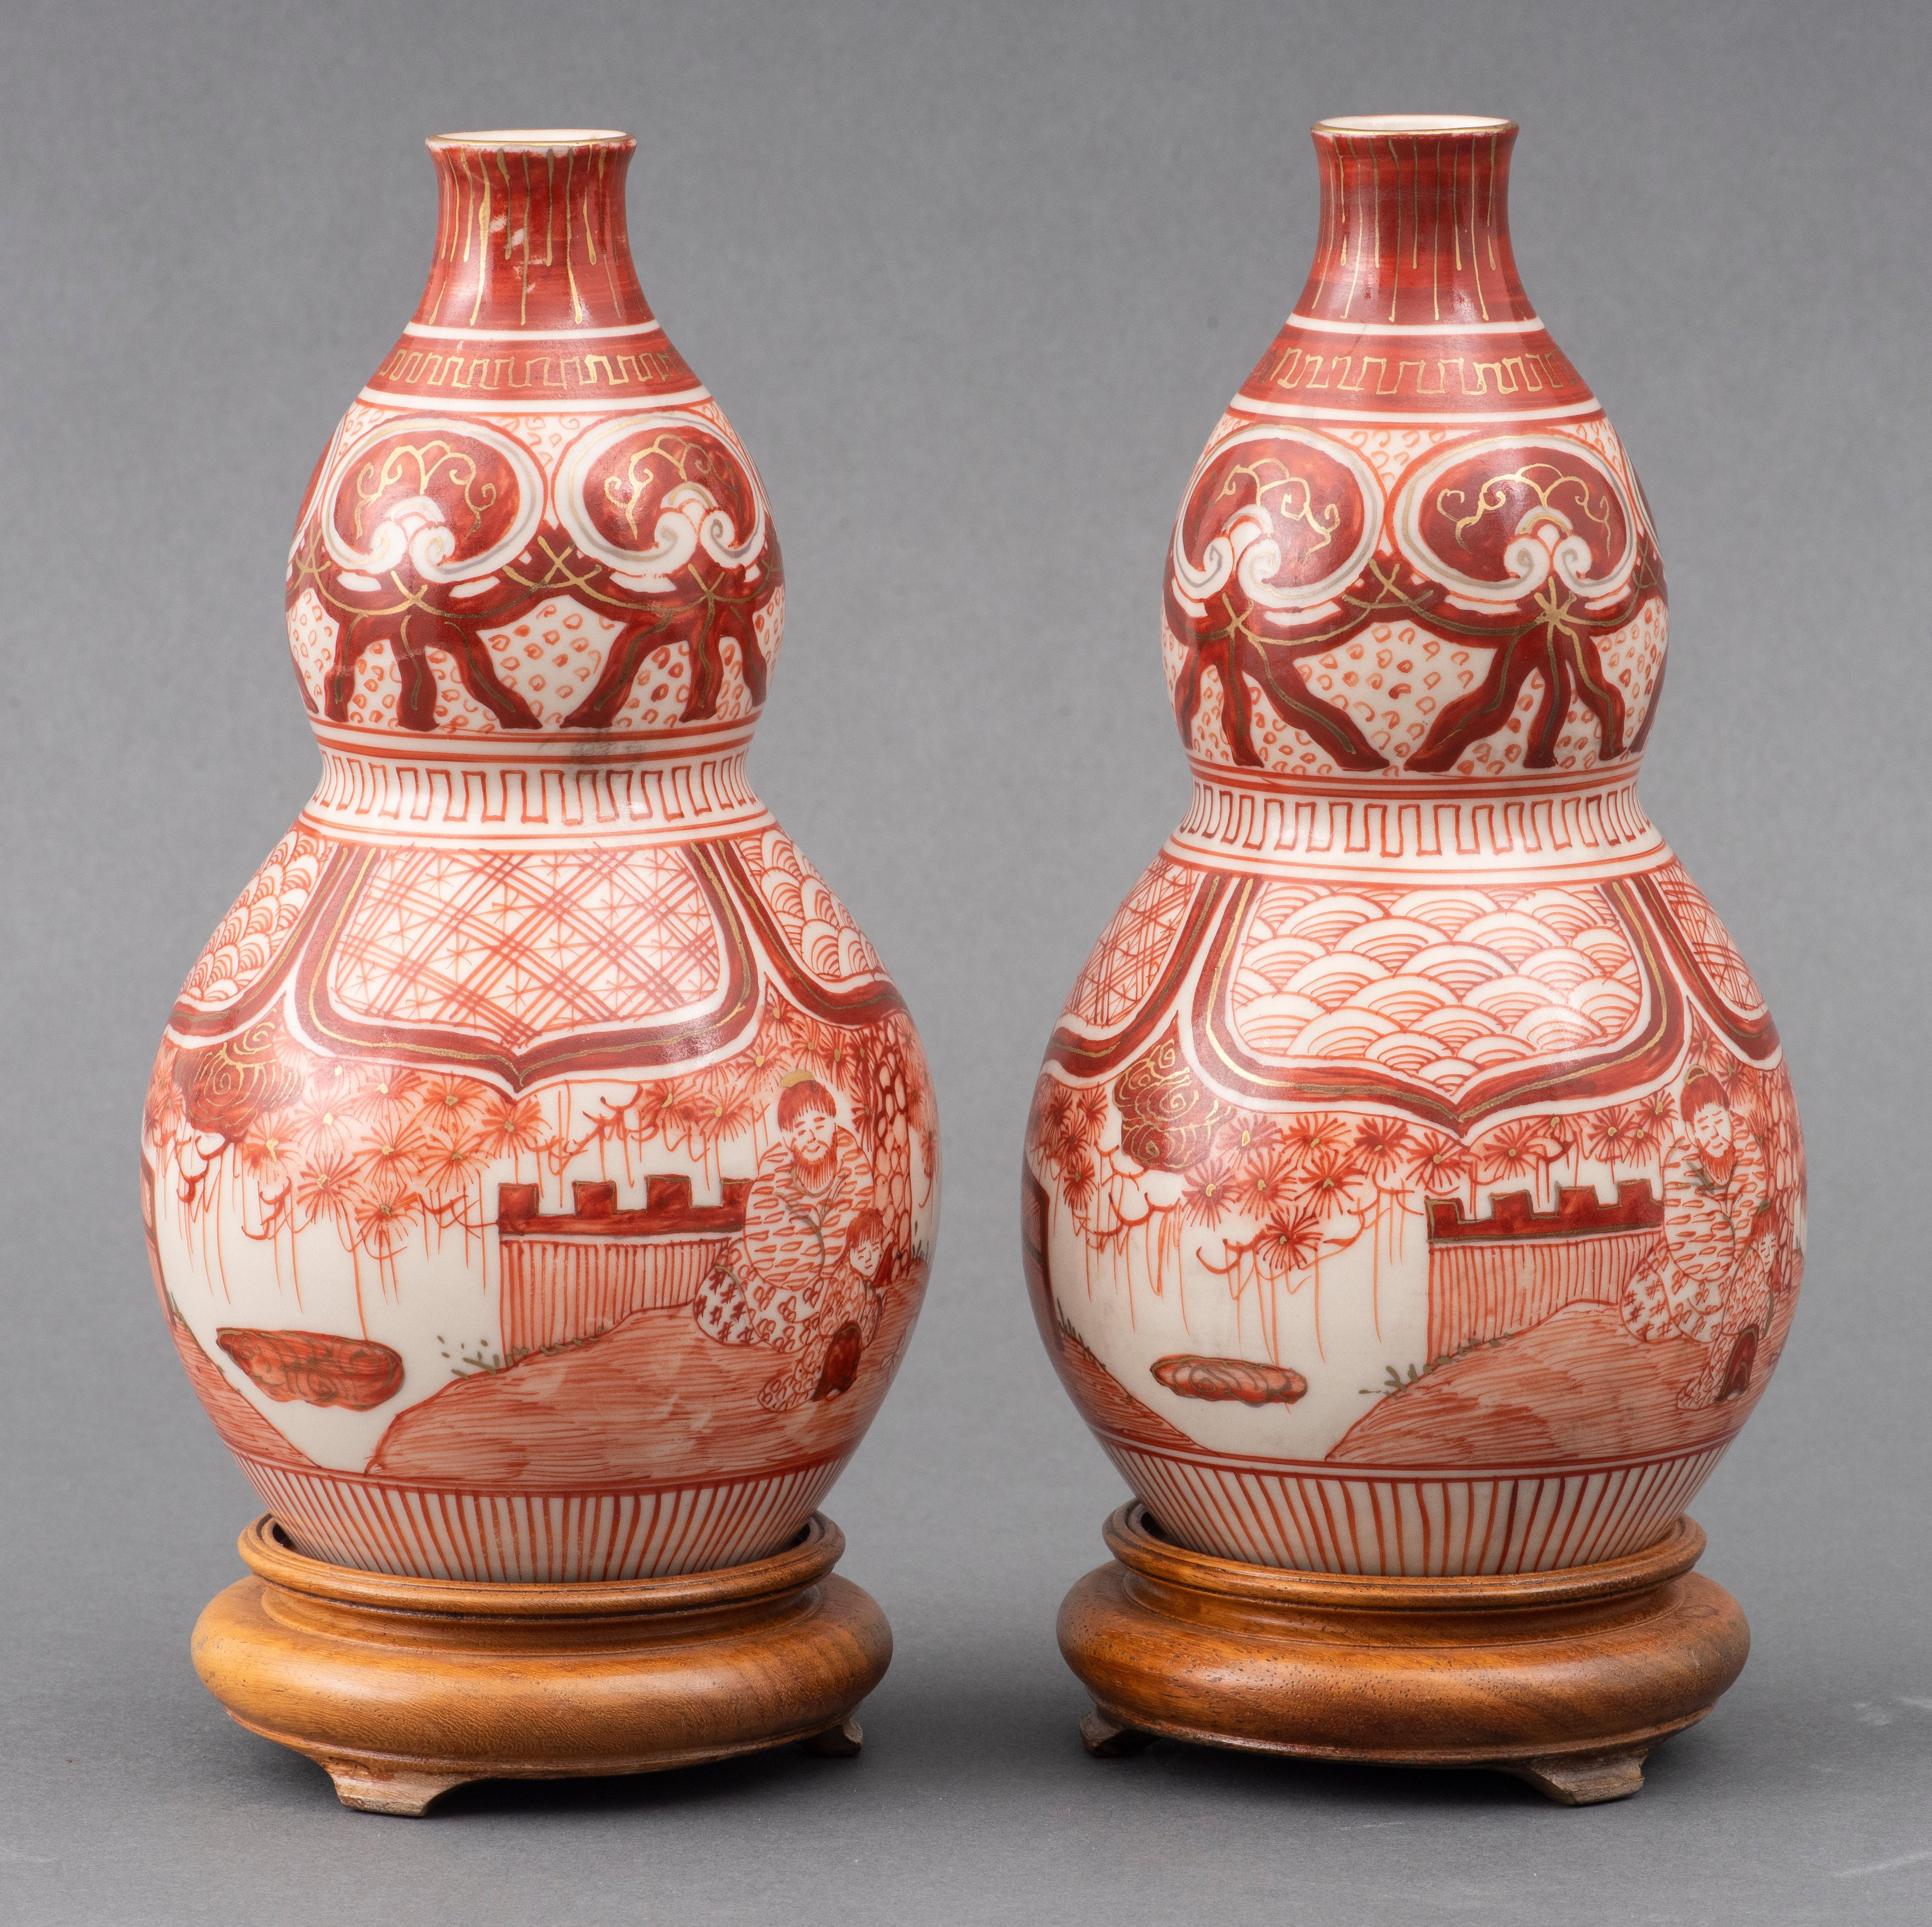 Pair of iron red decorated double gourd jars, late 19th century Japanese Kutani ware finely decorated with figures in a garden setting, gilt rim and painted Fuku mark on the bottom, each with wooden stand. 
Measures: 8